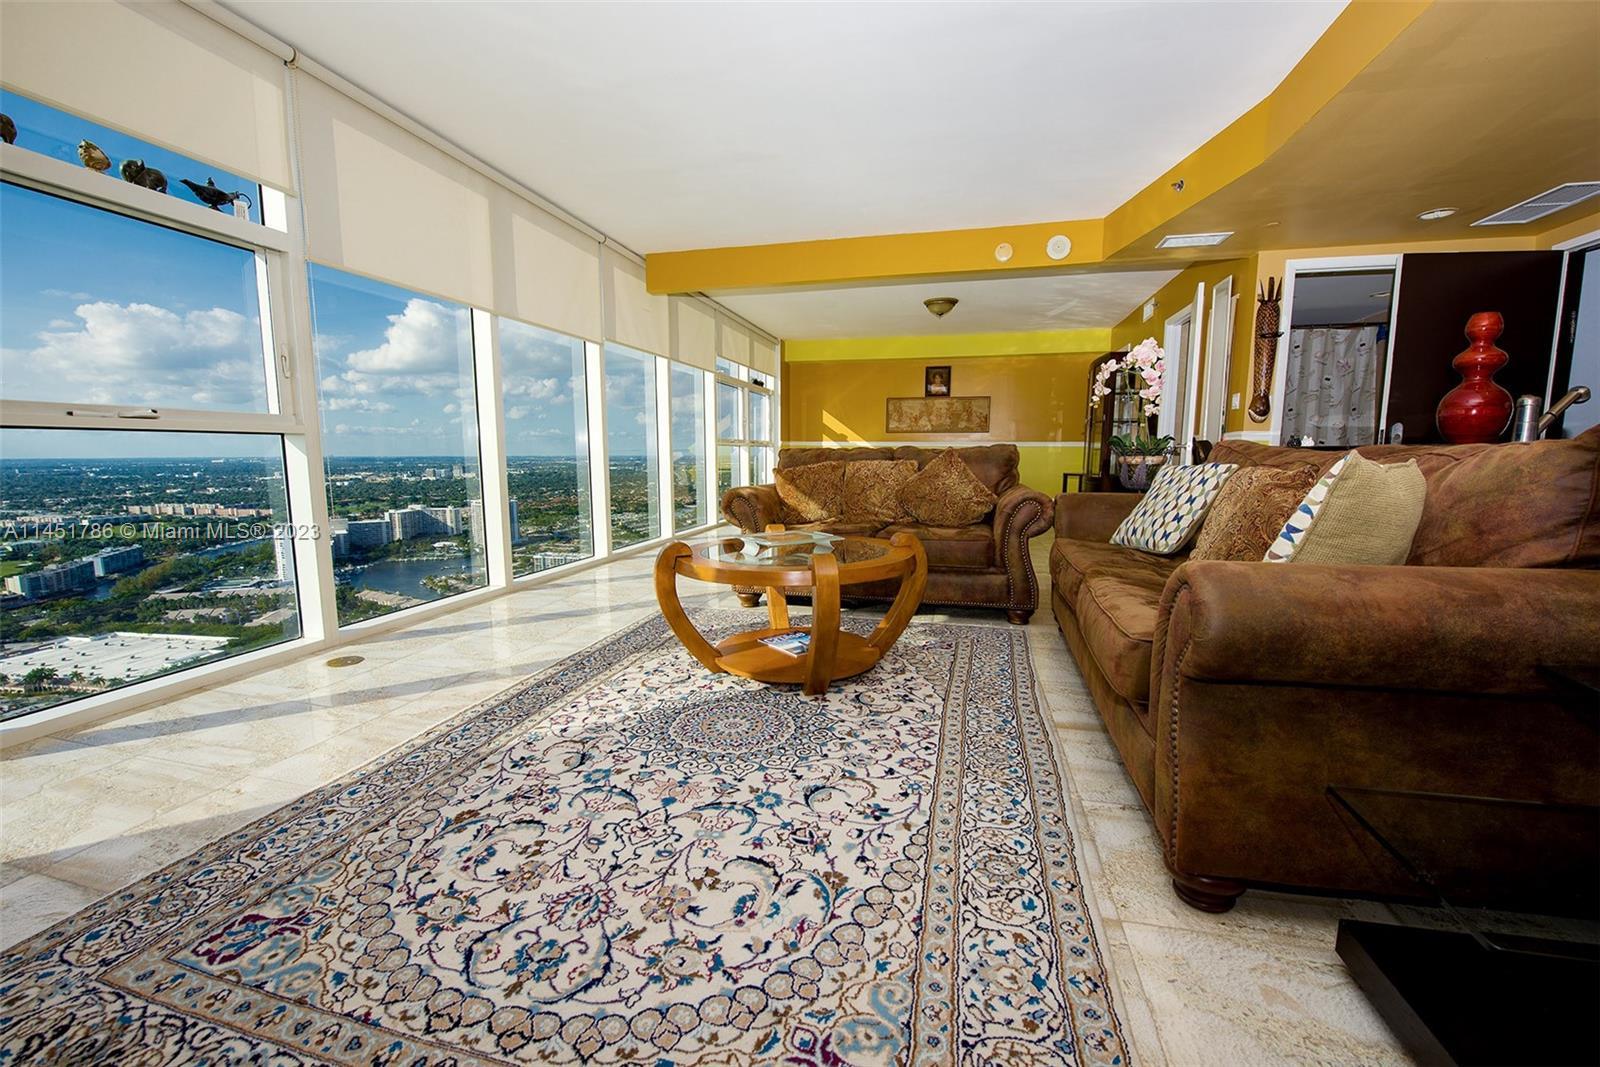 Panoramic 1 bedroom penthouse converted to the loft for sale by owner in the heart of Hallandale Bea